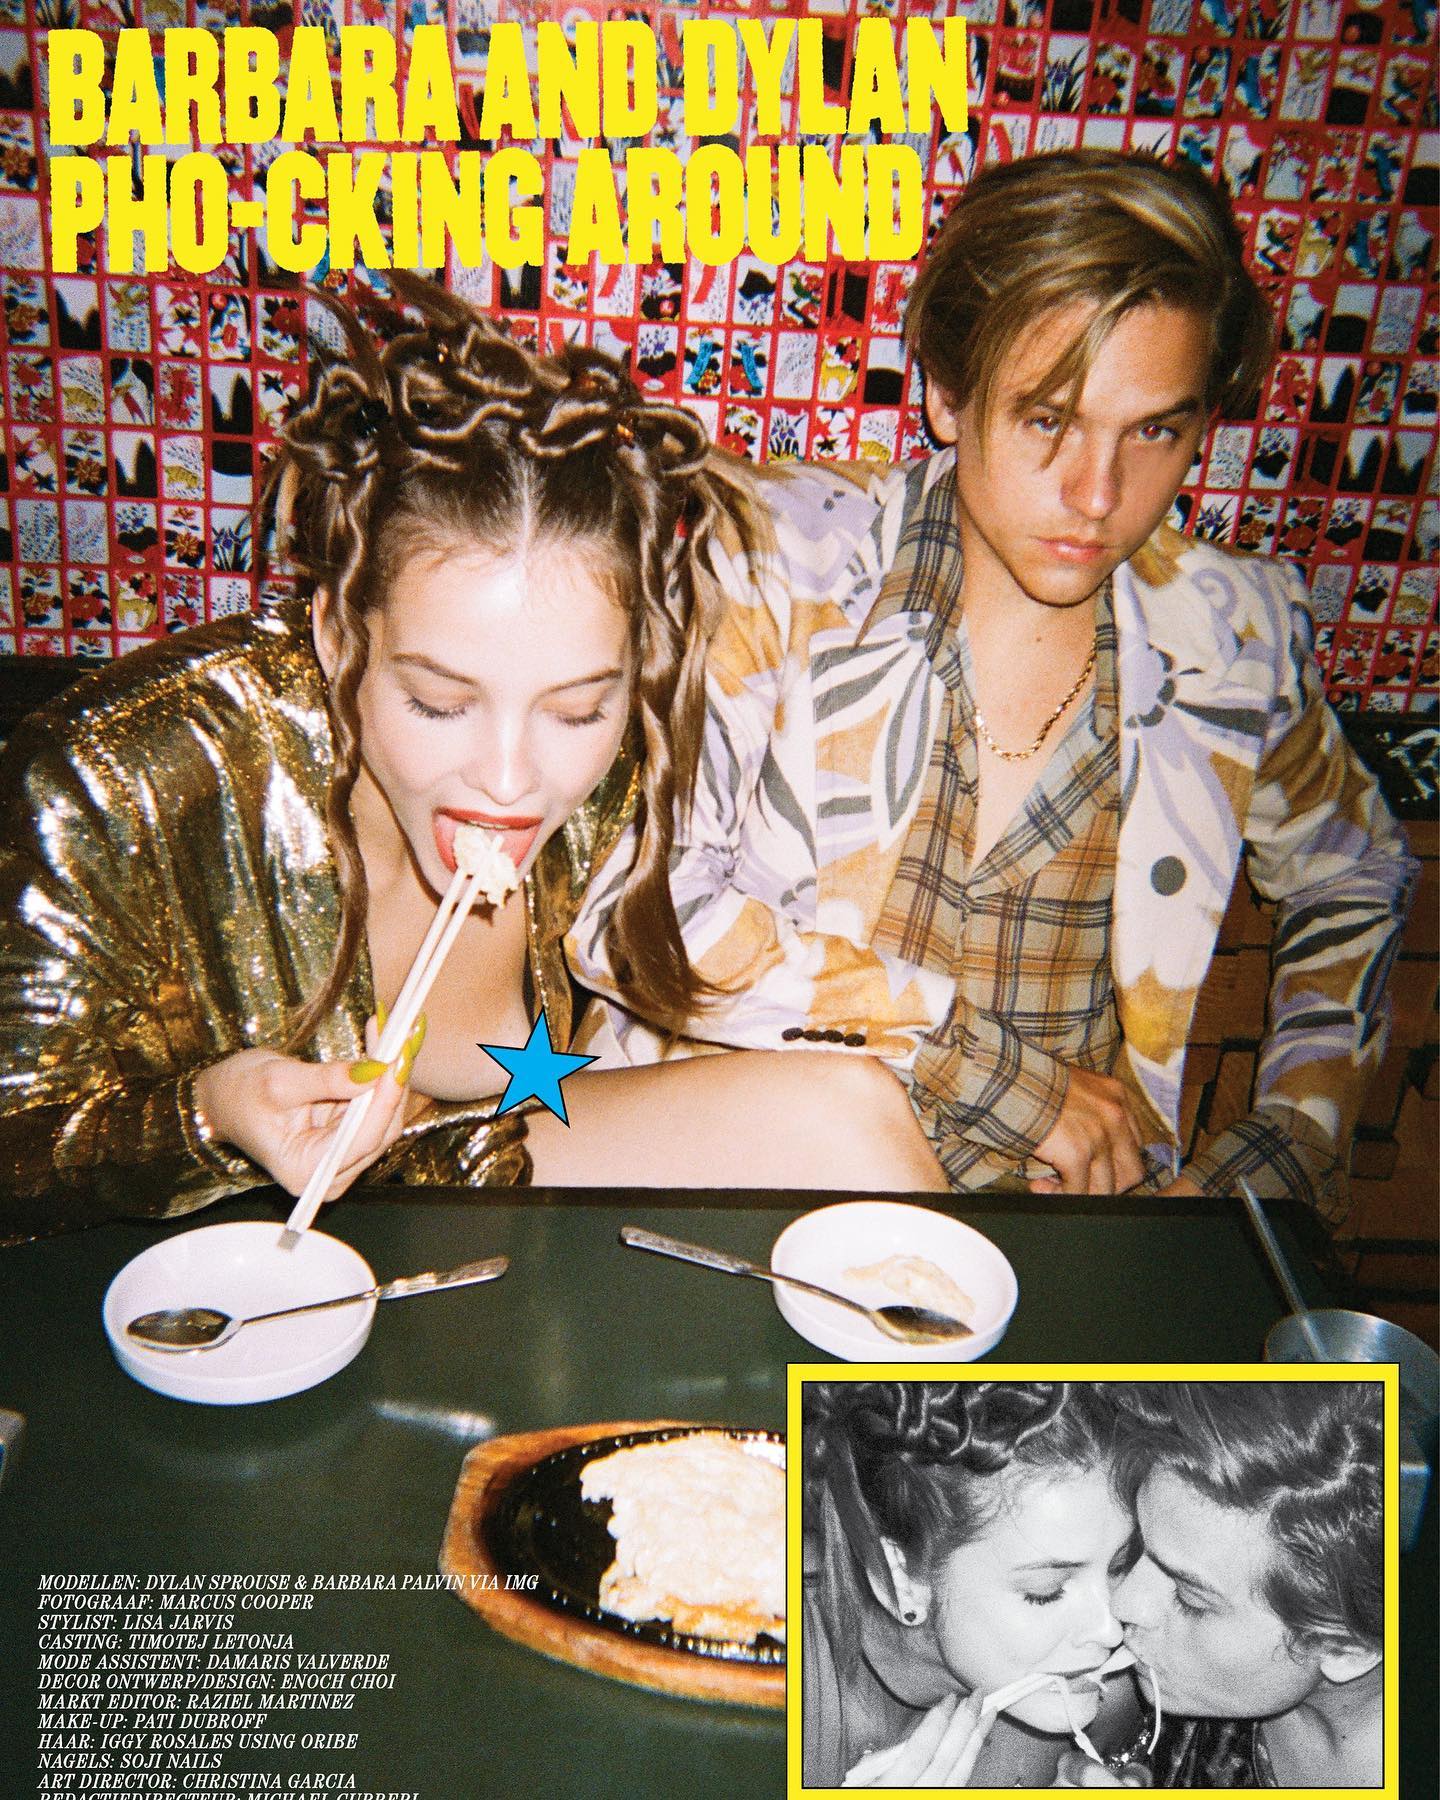 Fotos n°13 : Barbara Palvin y Dylan Sprouse Hit the Cover!